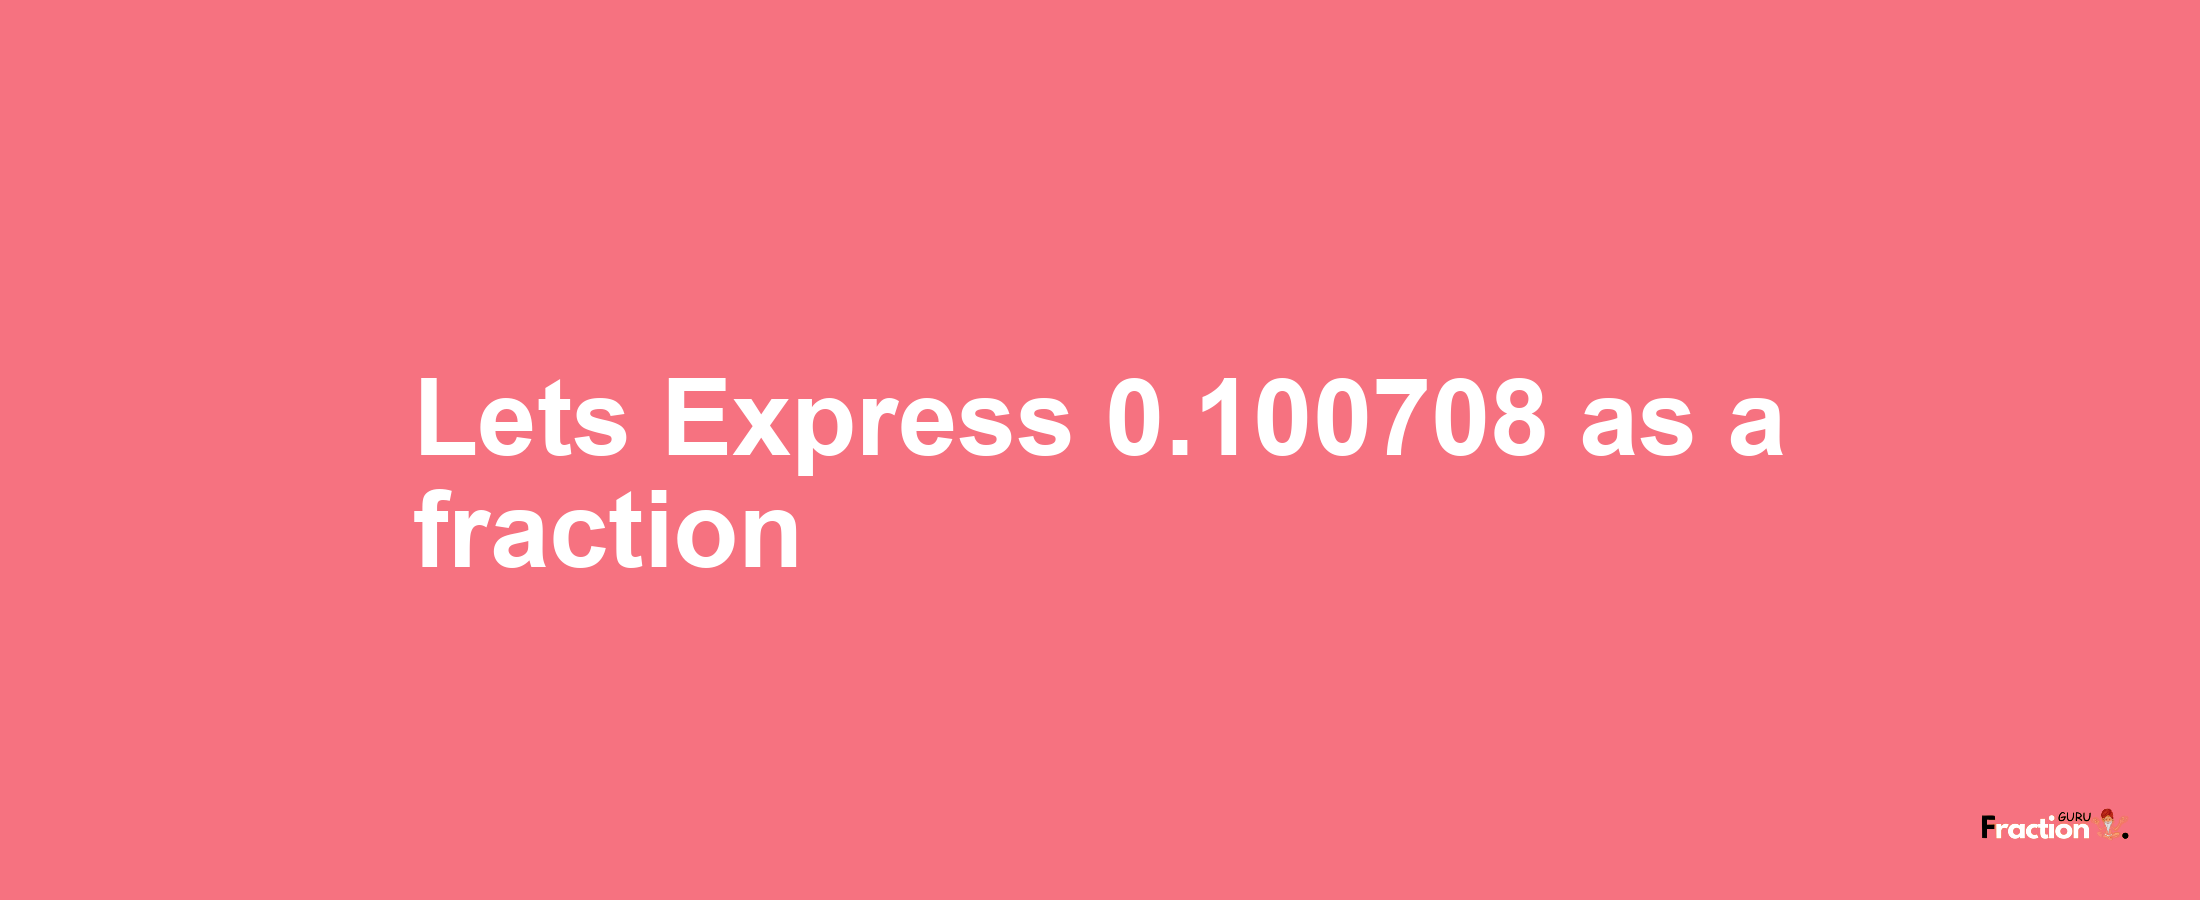 Lets Express 0.100708 as afraction